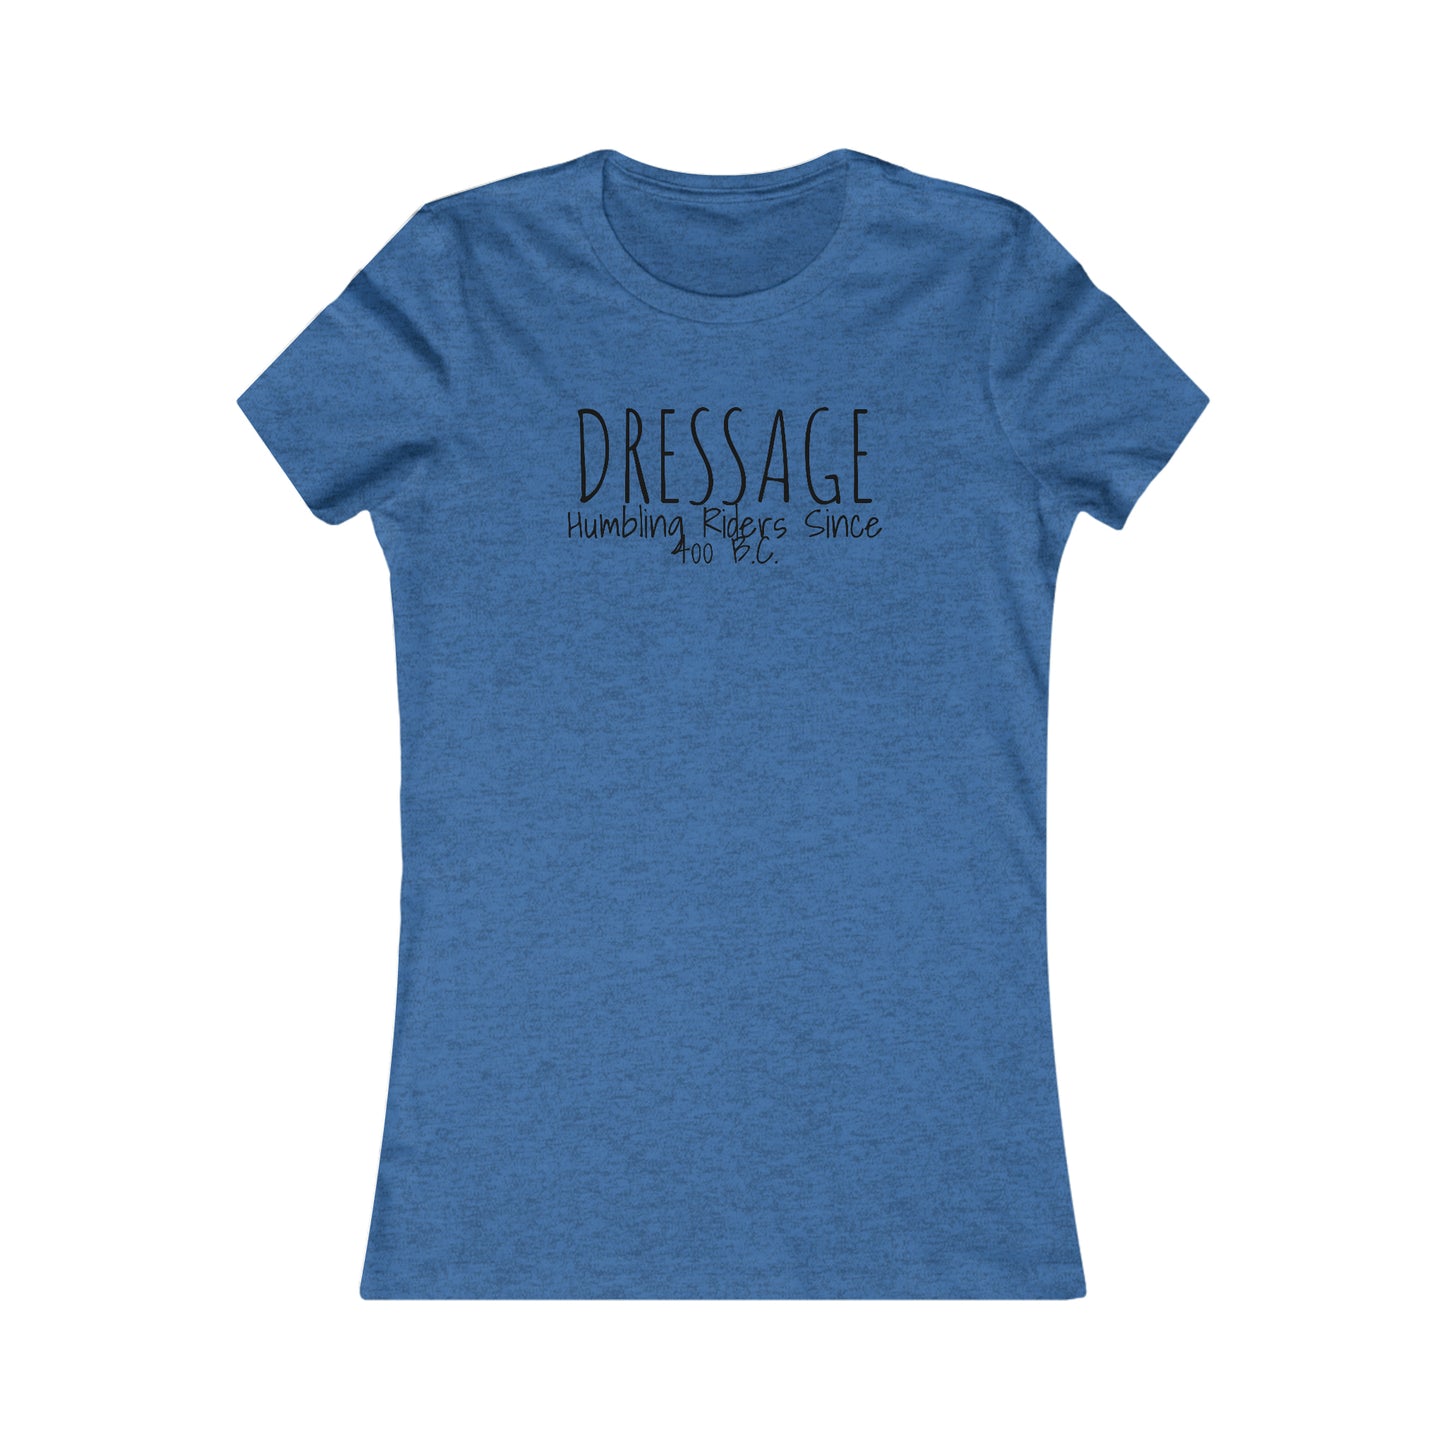 Shirt - Dressage, Humbling Riders Since 400 B.C. - Fitted T